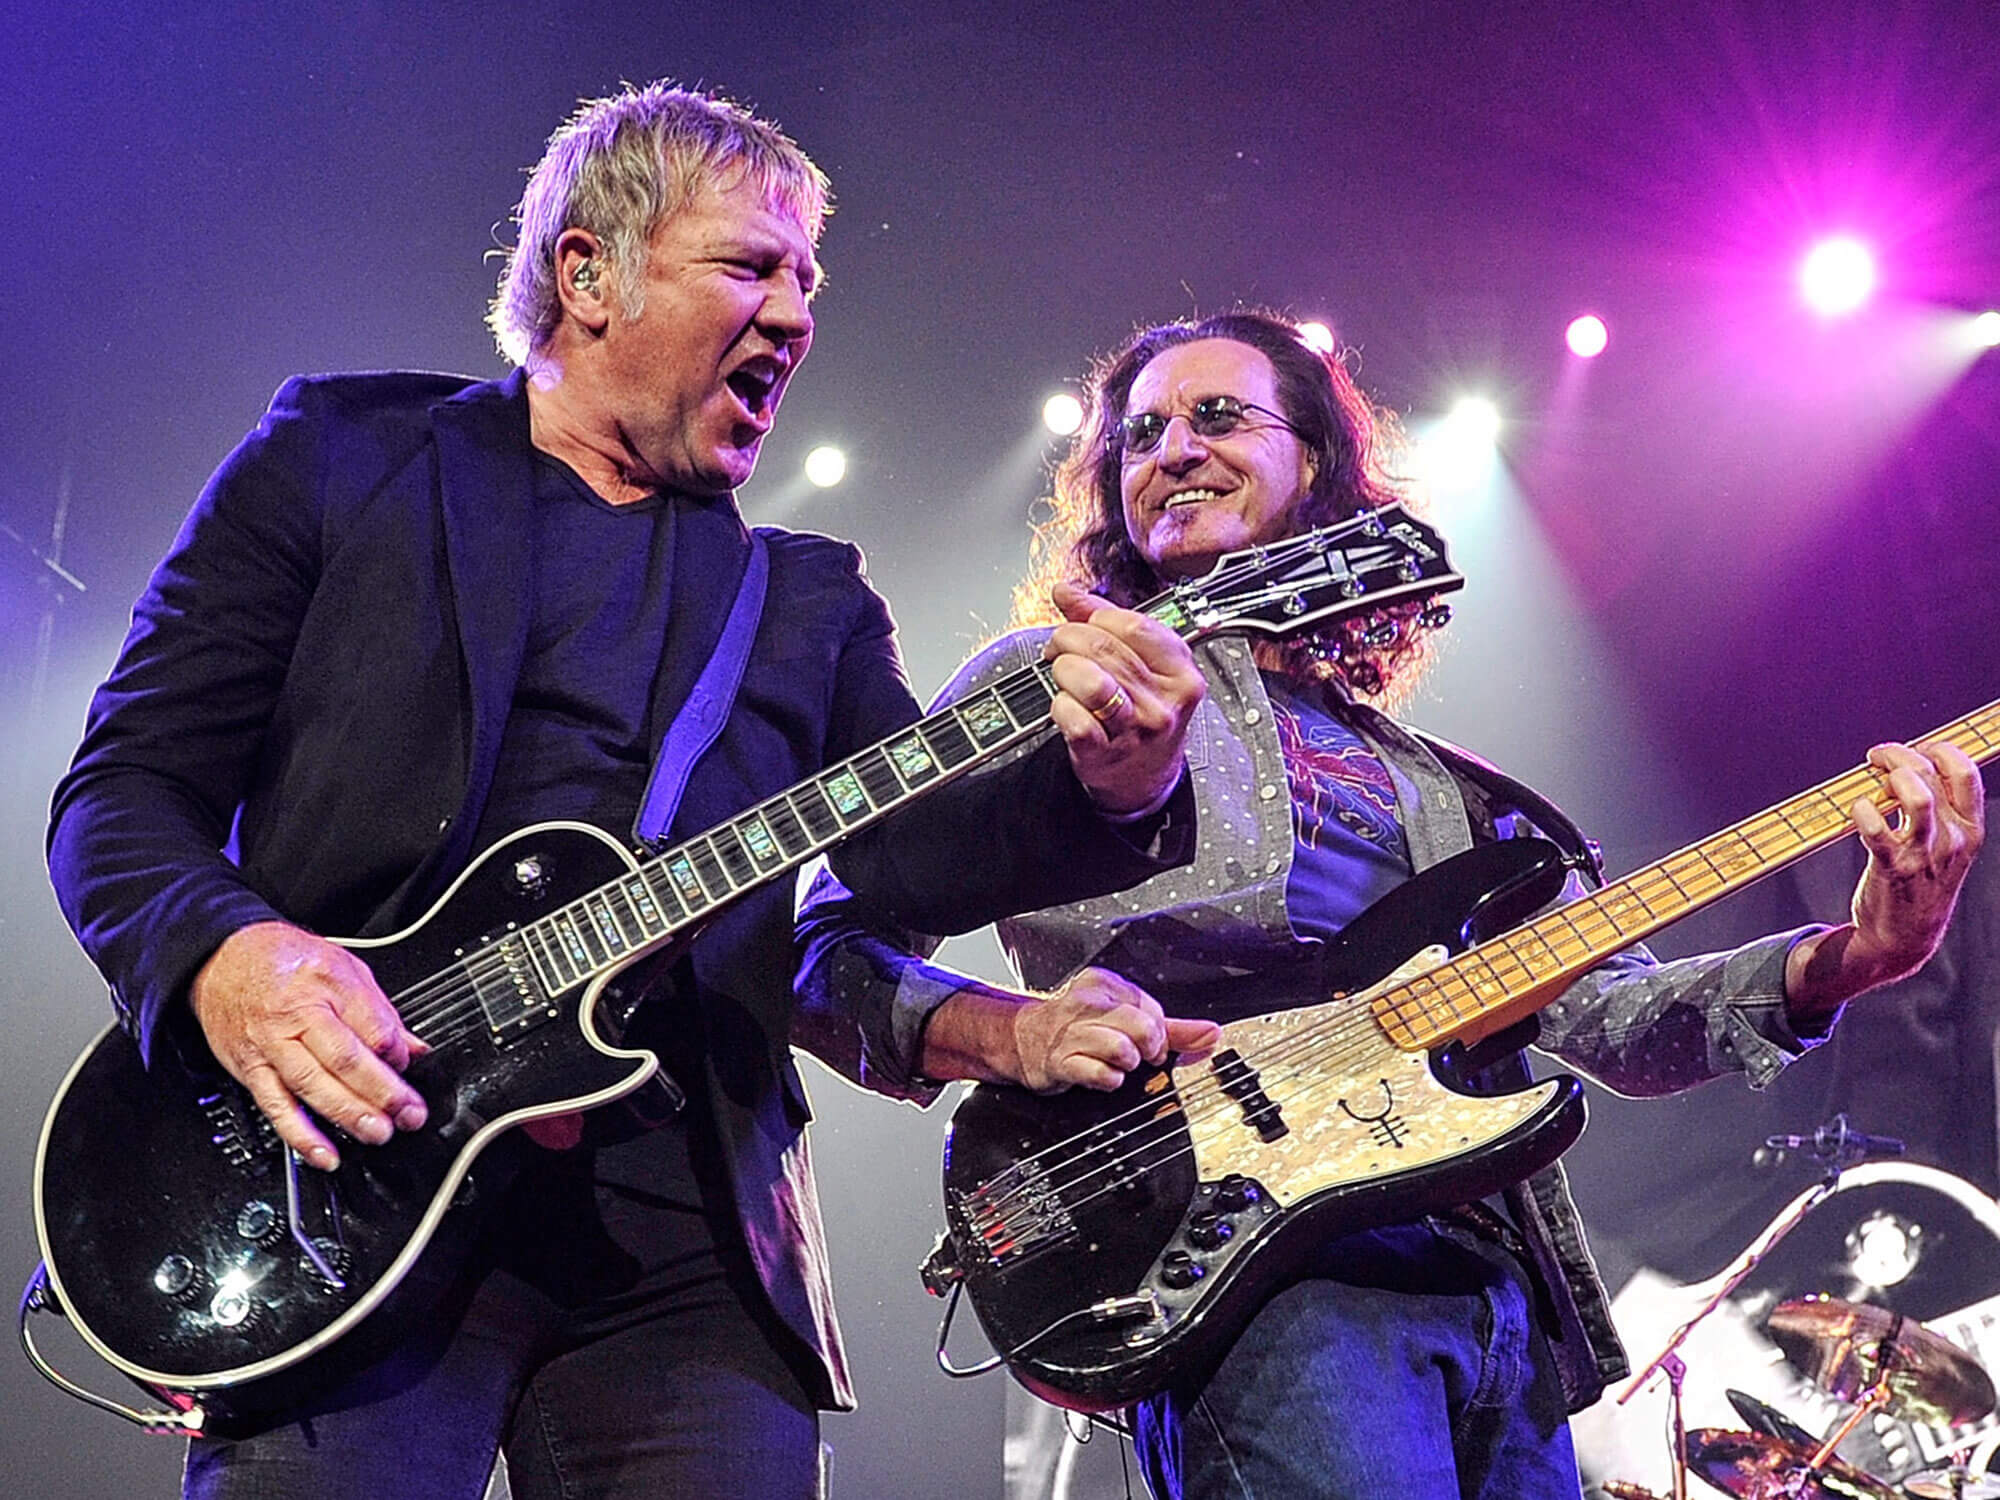 [L-R] Alex Lifeson and Geddy Lee performing live